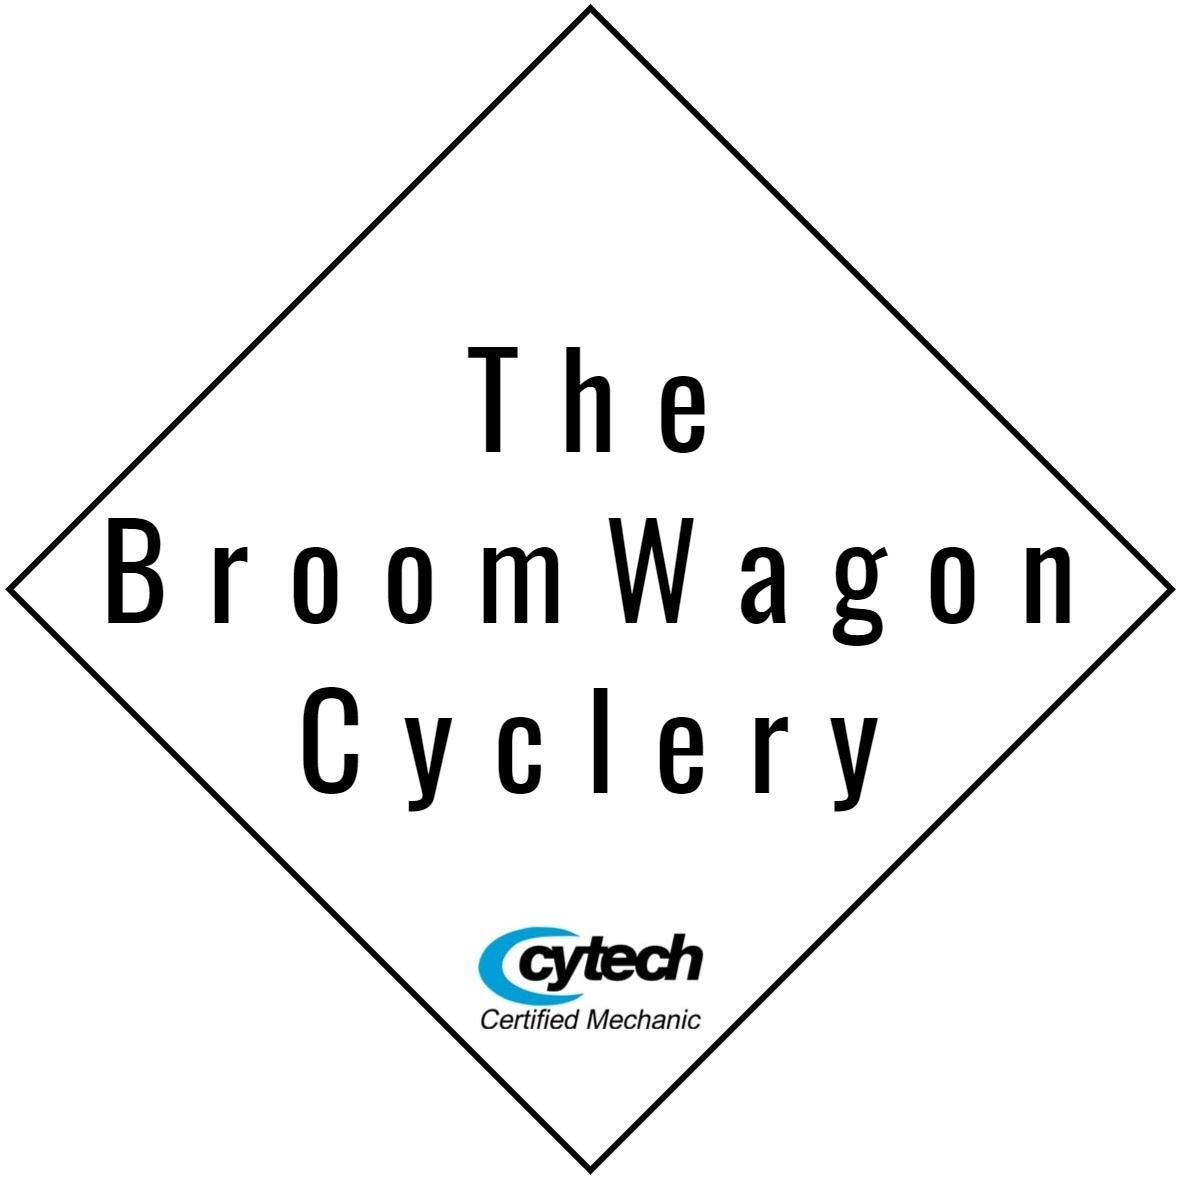 Broomwagon Cyclery promotional image